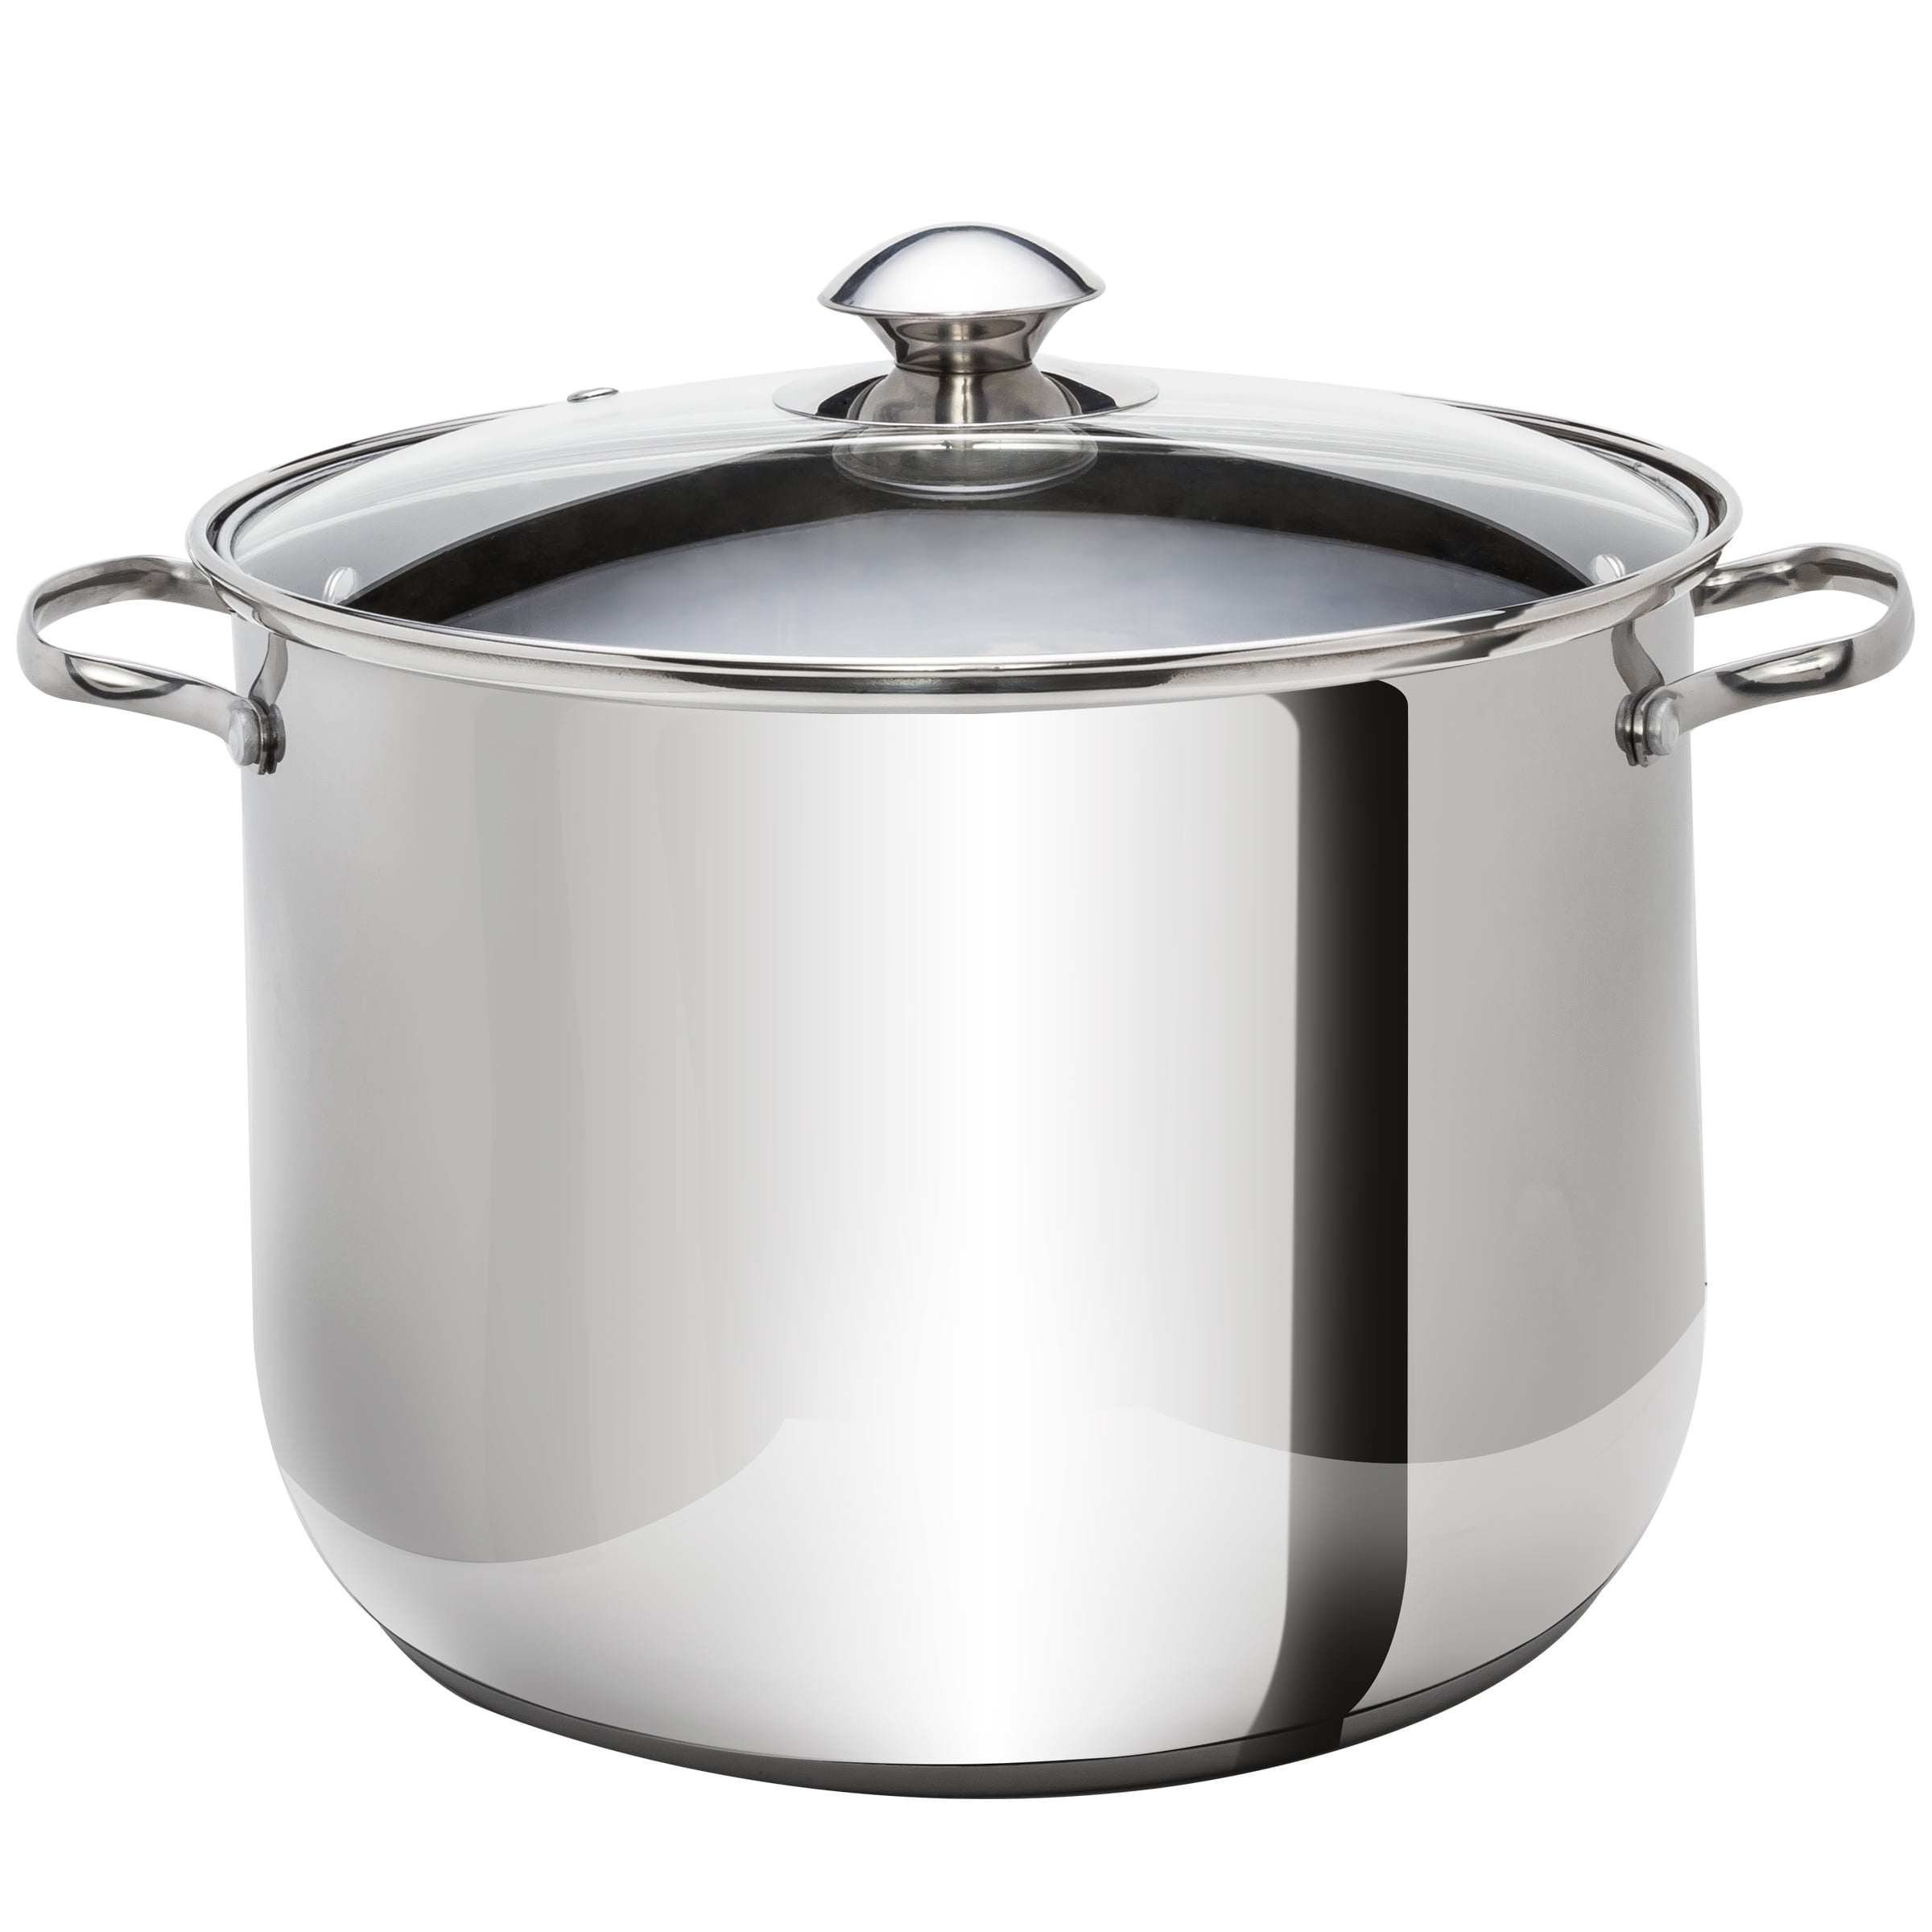  Ecolution Stainless Steel Stock Pot with Encapsulated